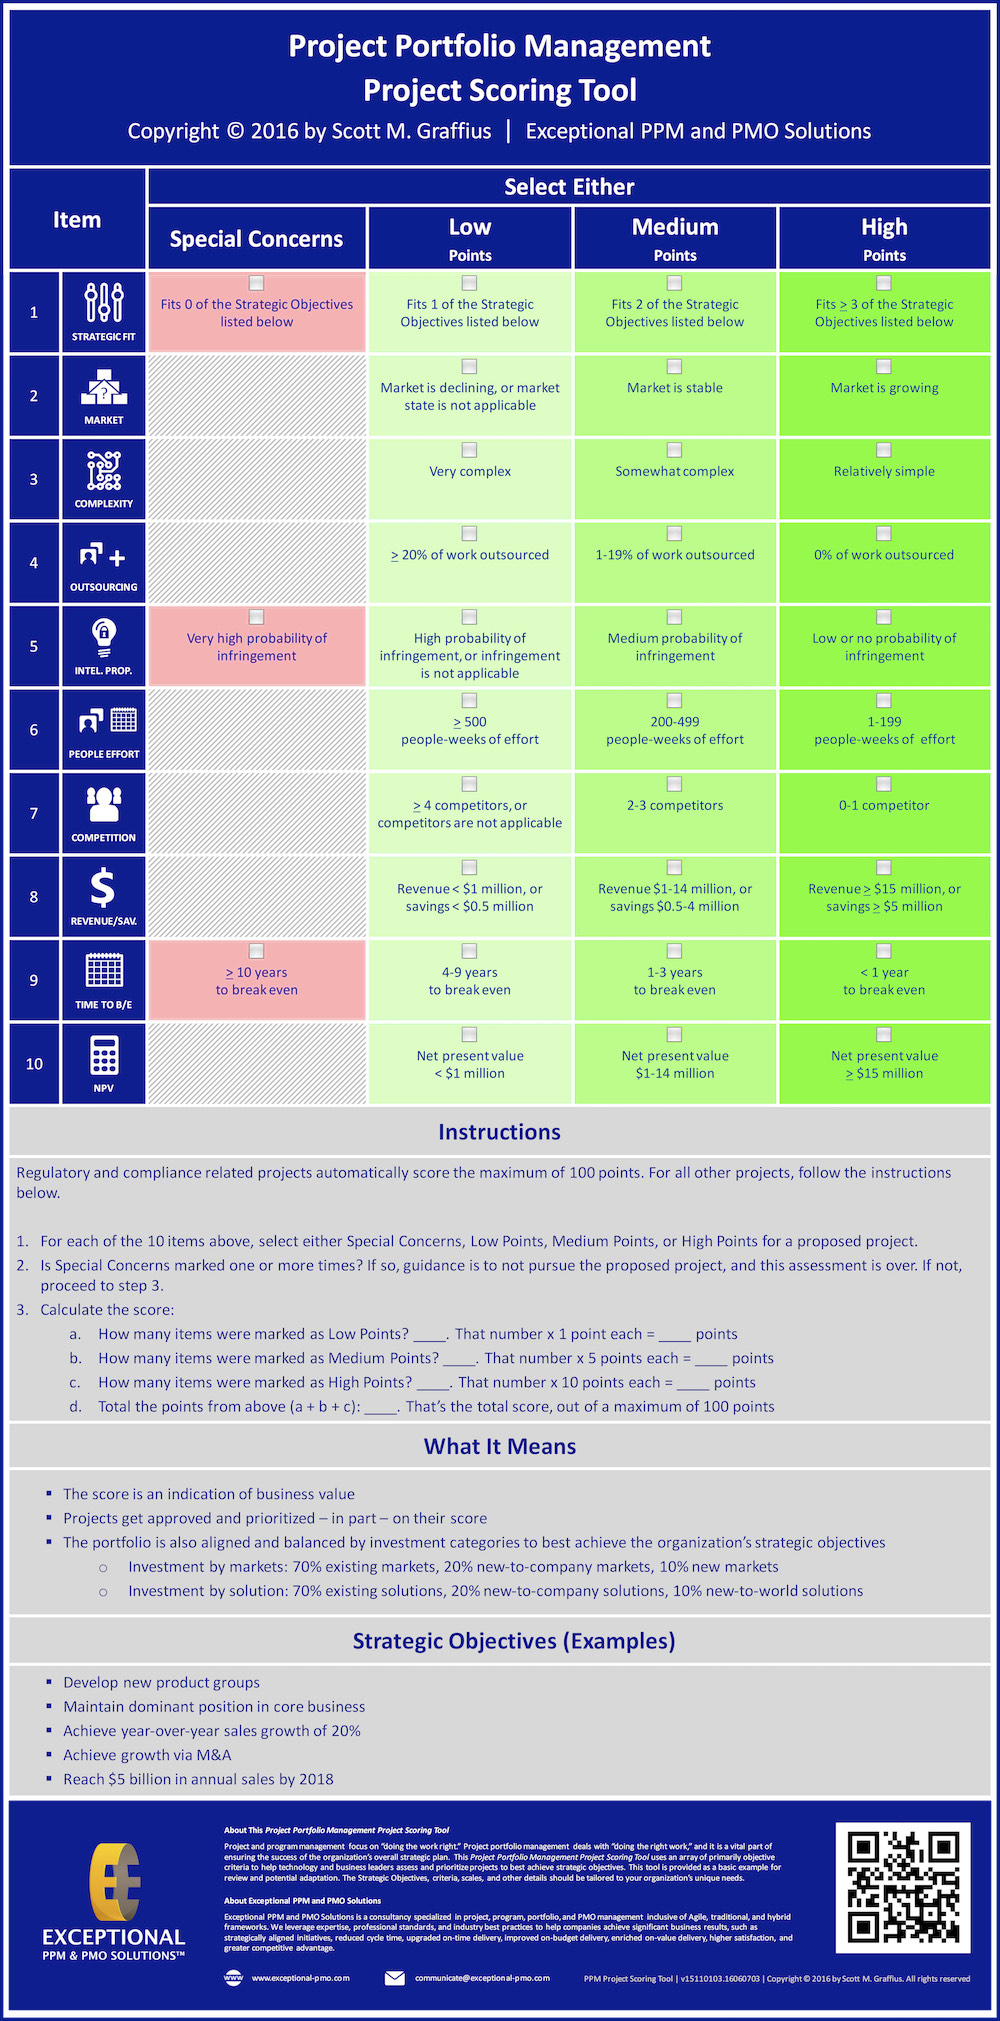 Scott-M-Graffius-Exceptional-PPM-and-PMO-Solutions-Infographic-PPM-Prioritization-LR-SQ